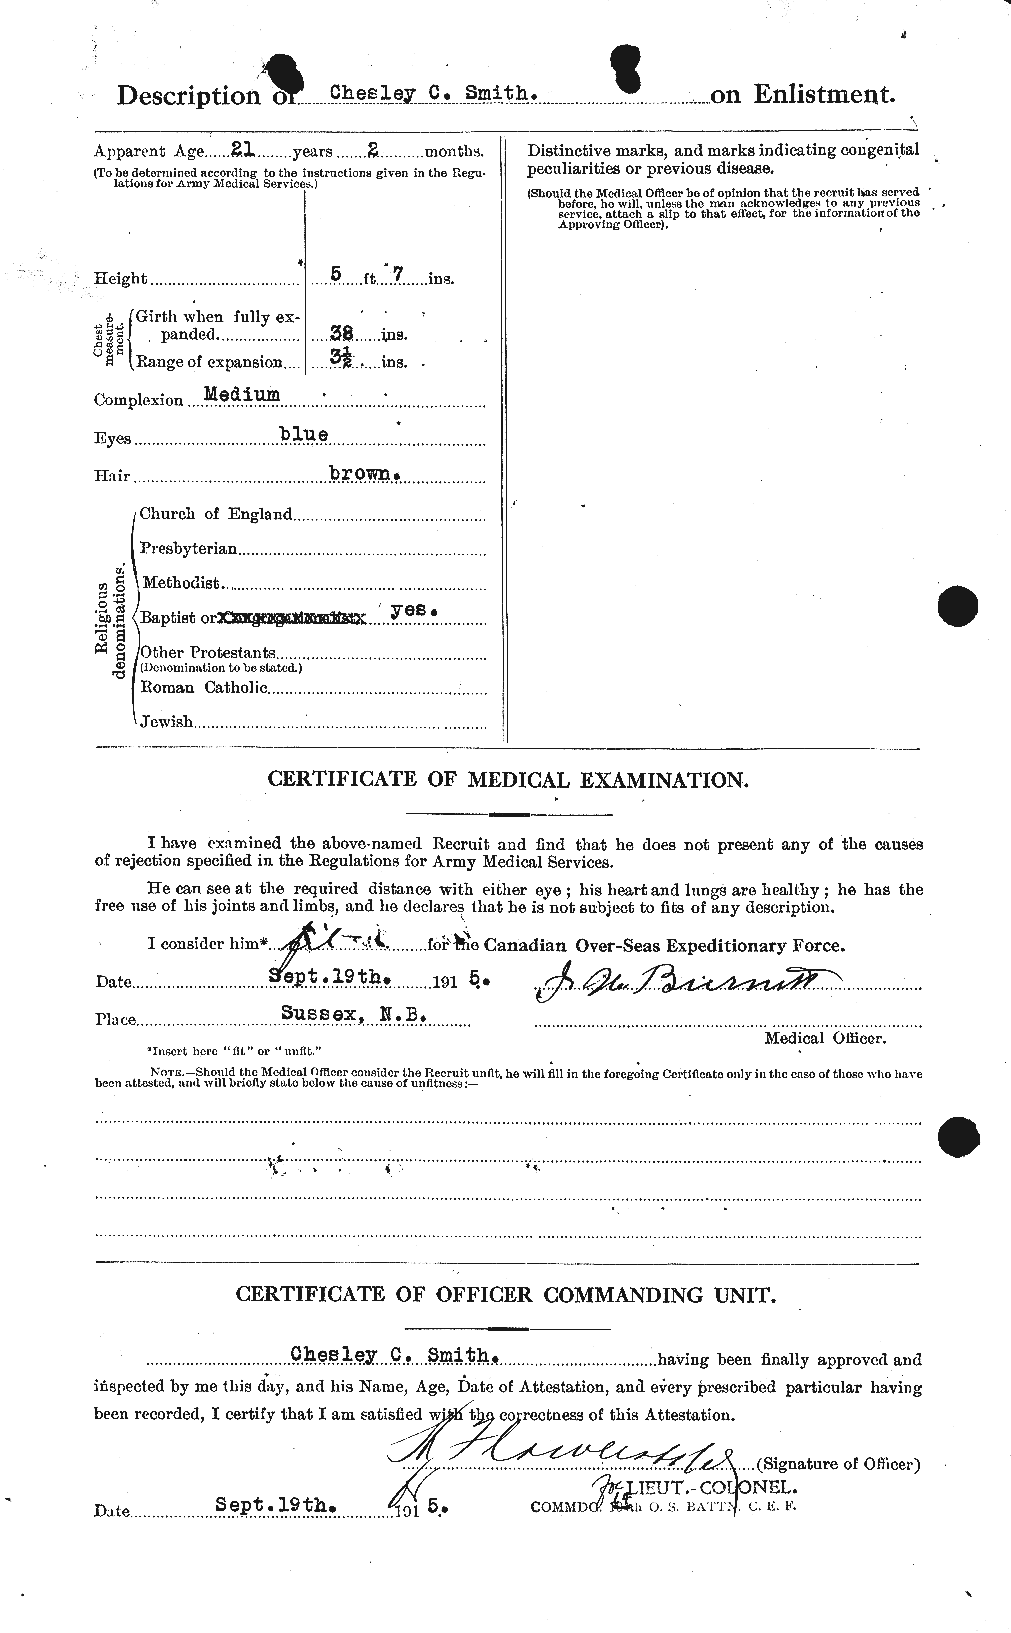 Personnel Records of the First World War - CEF 104037b